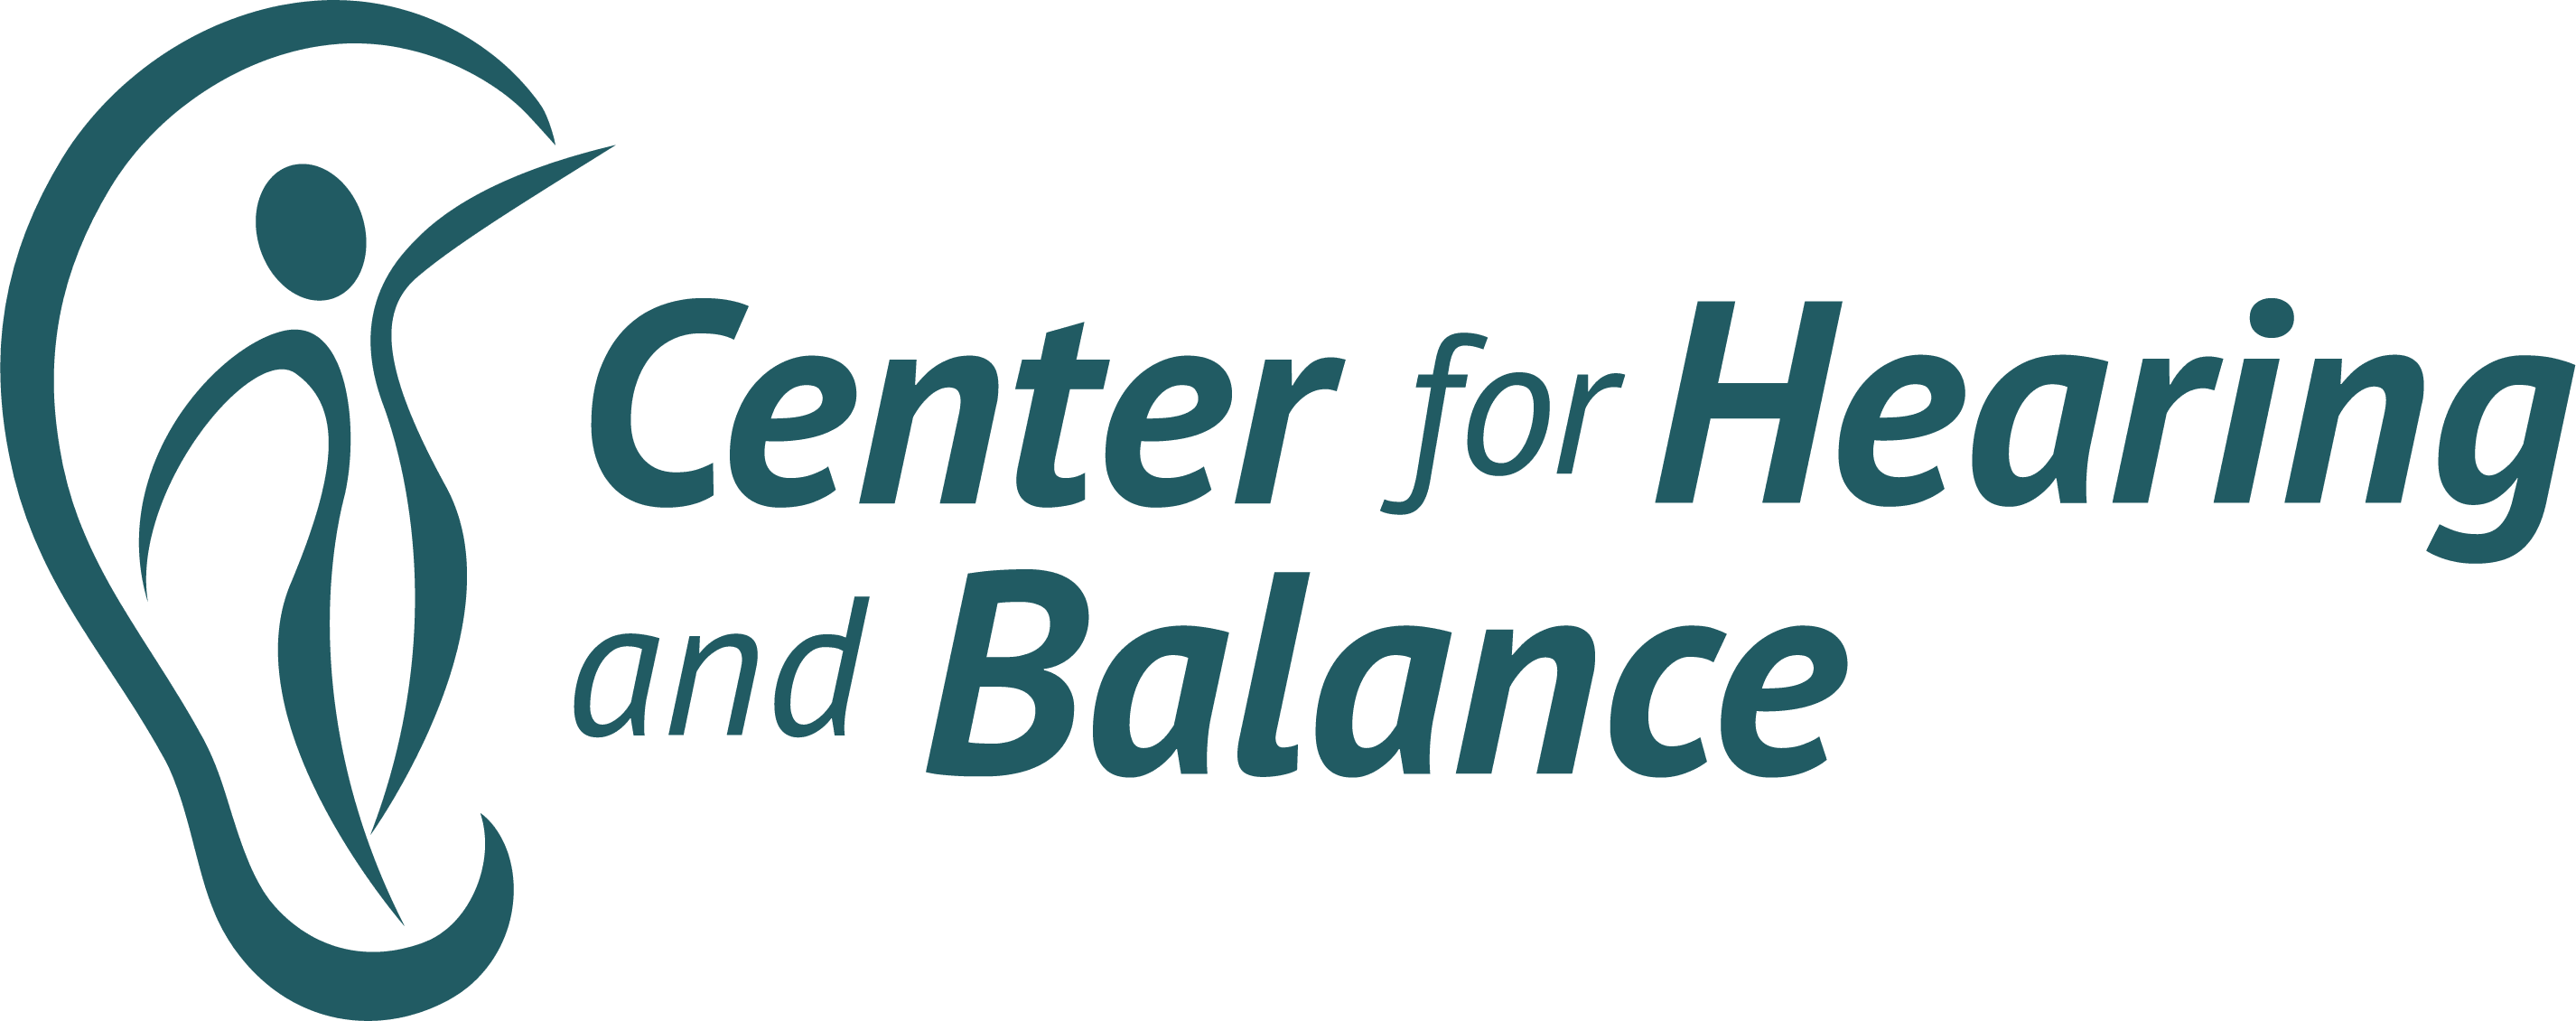 Center for Hearing and Balance